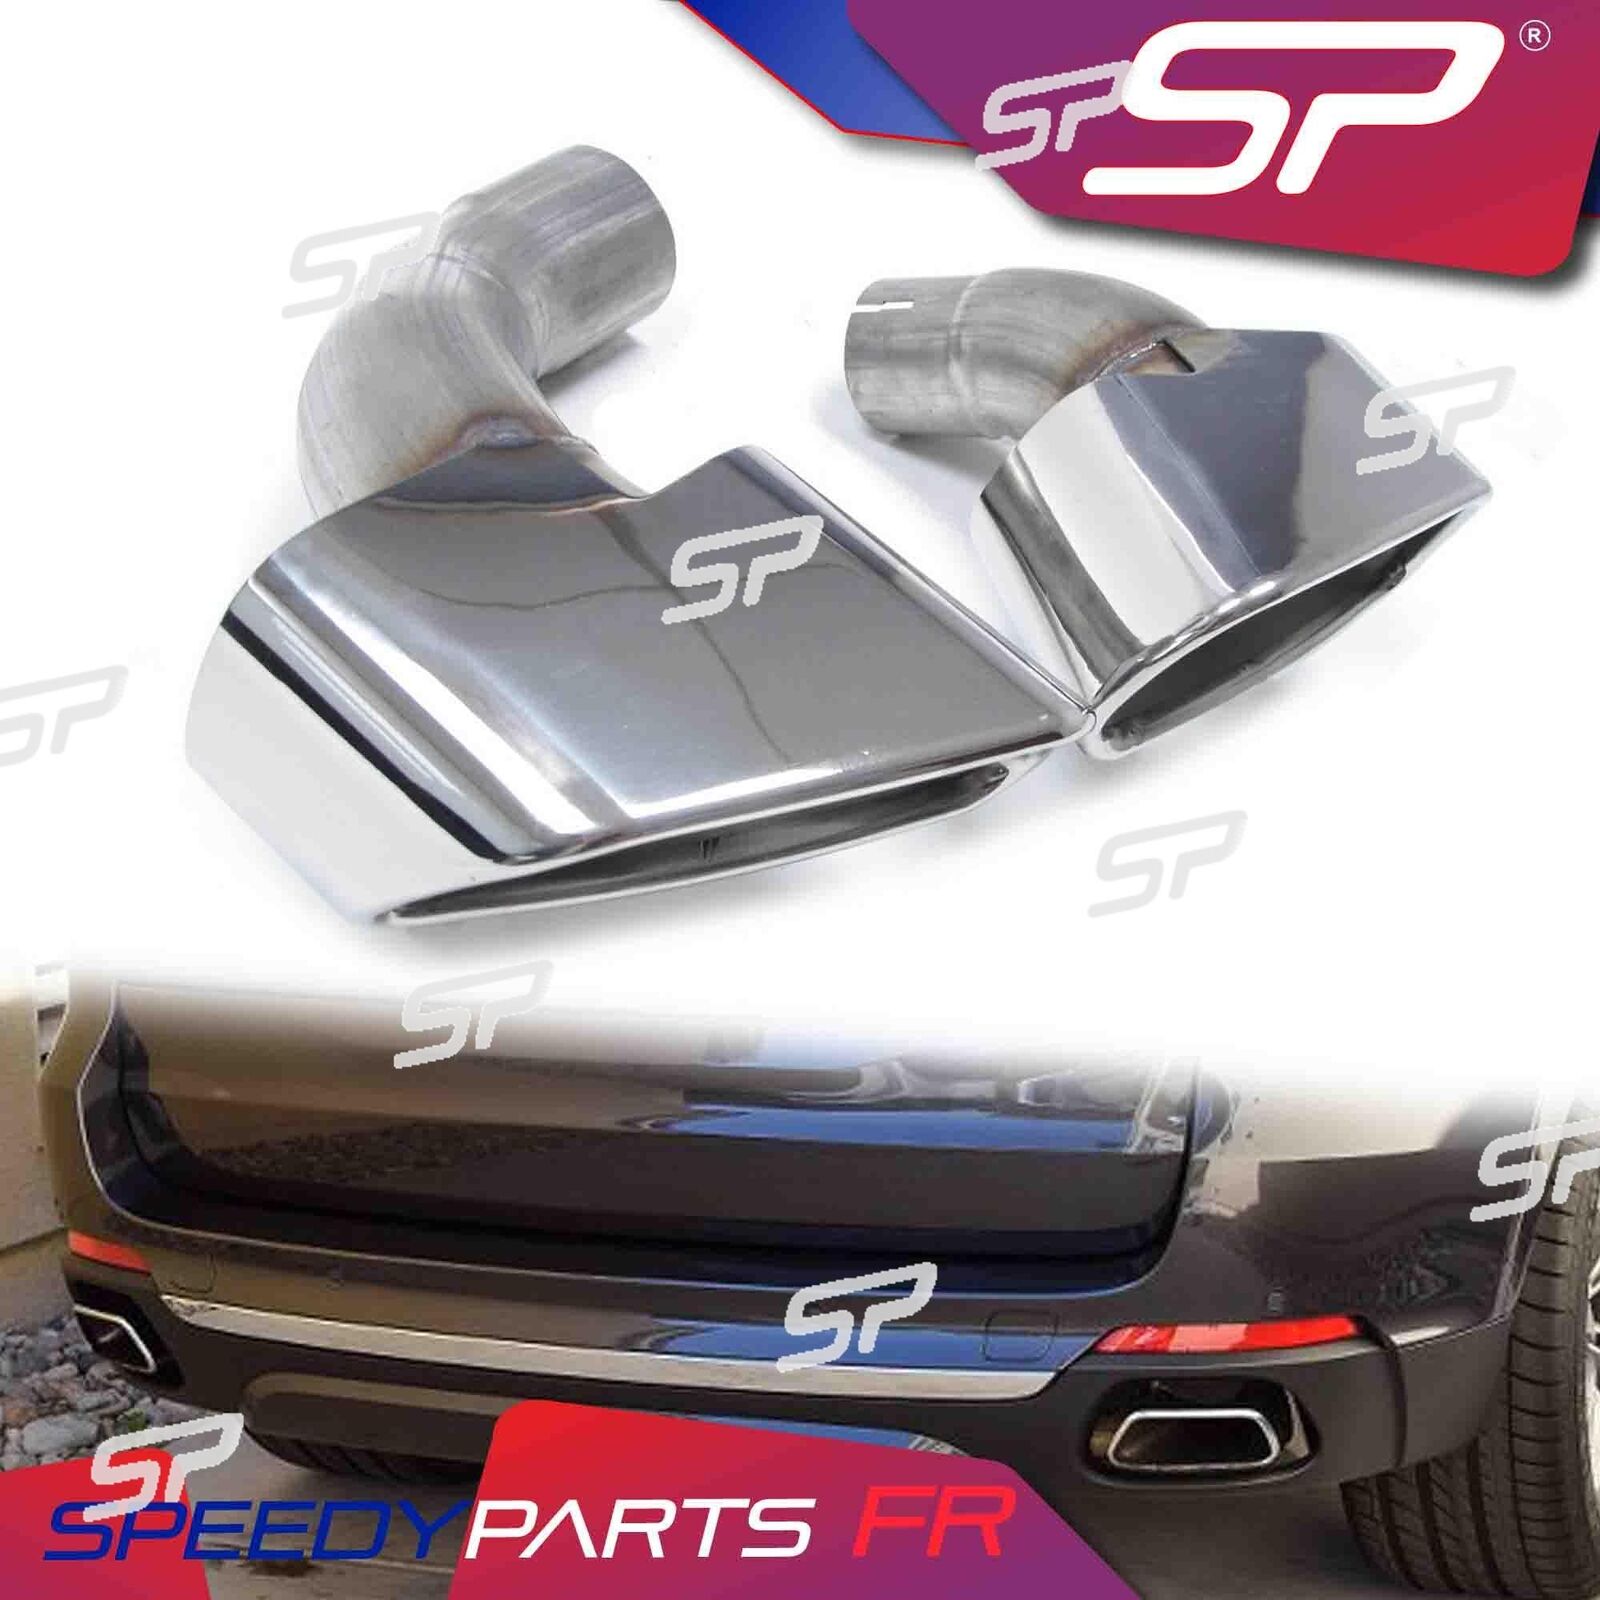 Sporty Exhaust Tips Pipes Chrome for BMW X5 F15 28i 2014-2018